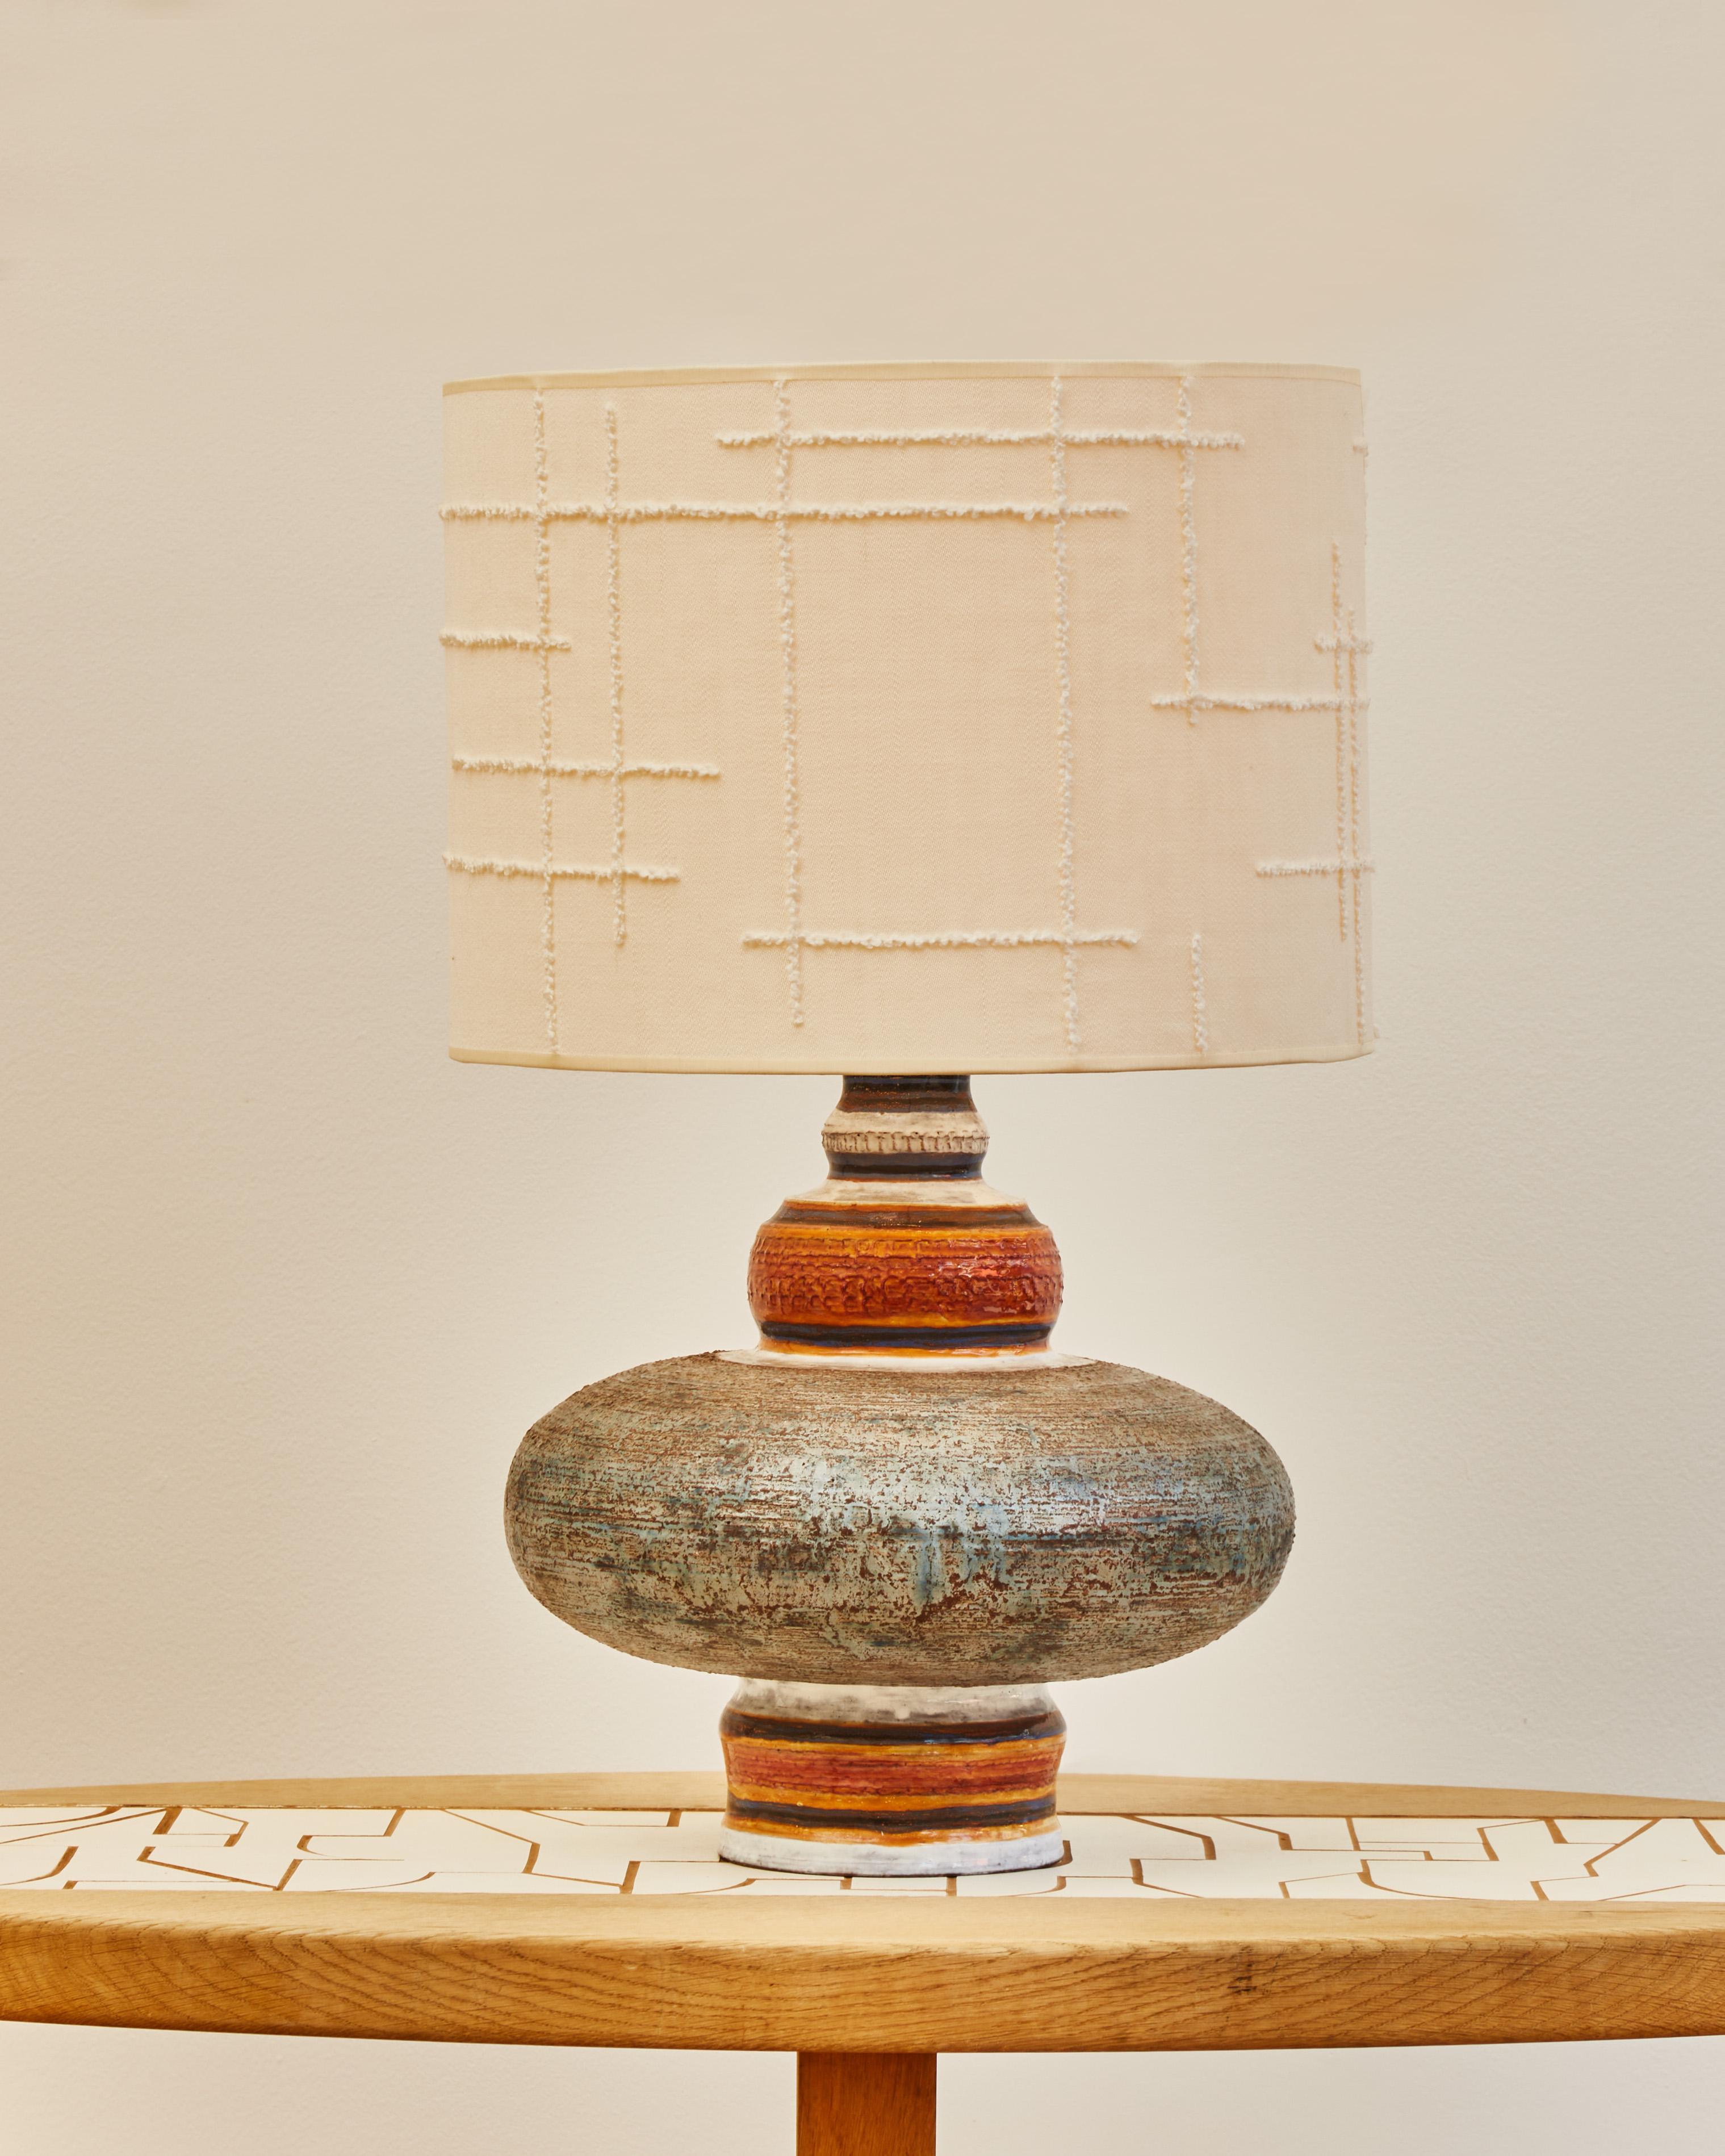 Single glazed ceramic table lamp by the French artist Jacques Poussine, sold with a new shade with Dedar fabric.
Jacques Poussine is a French artist born in 1923 in Albi (south of France) who specialized in pottery and ceramics essentially working